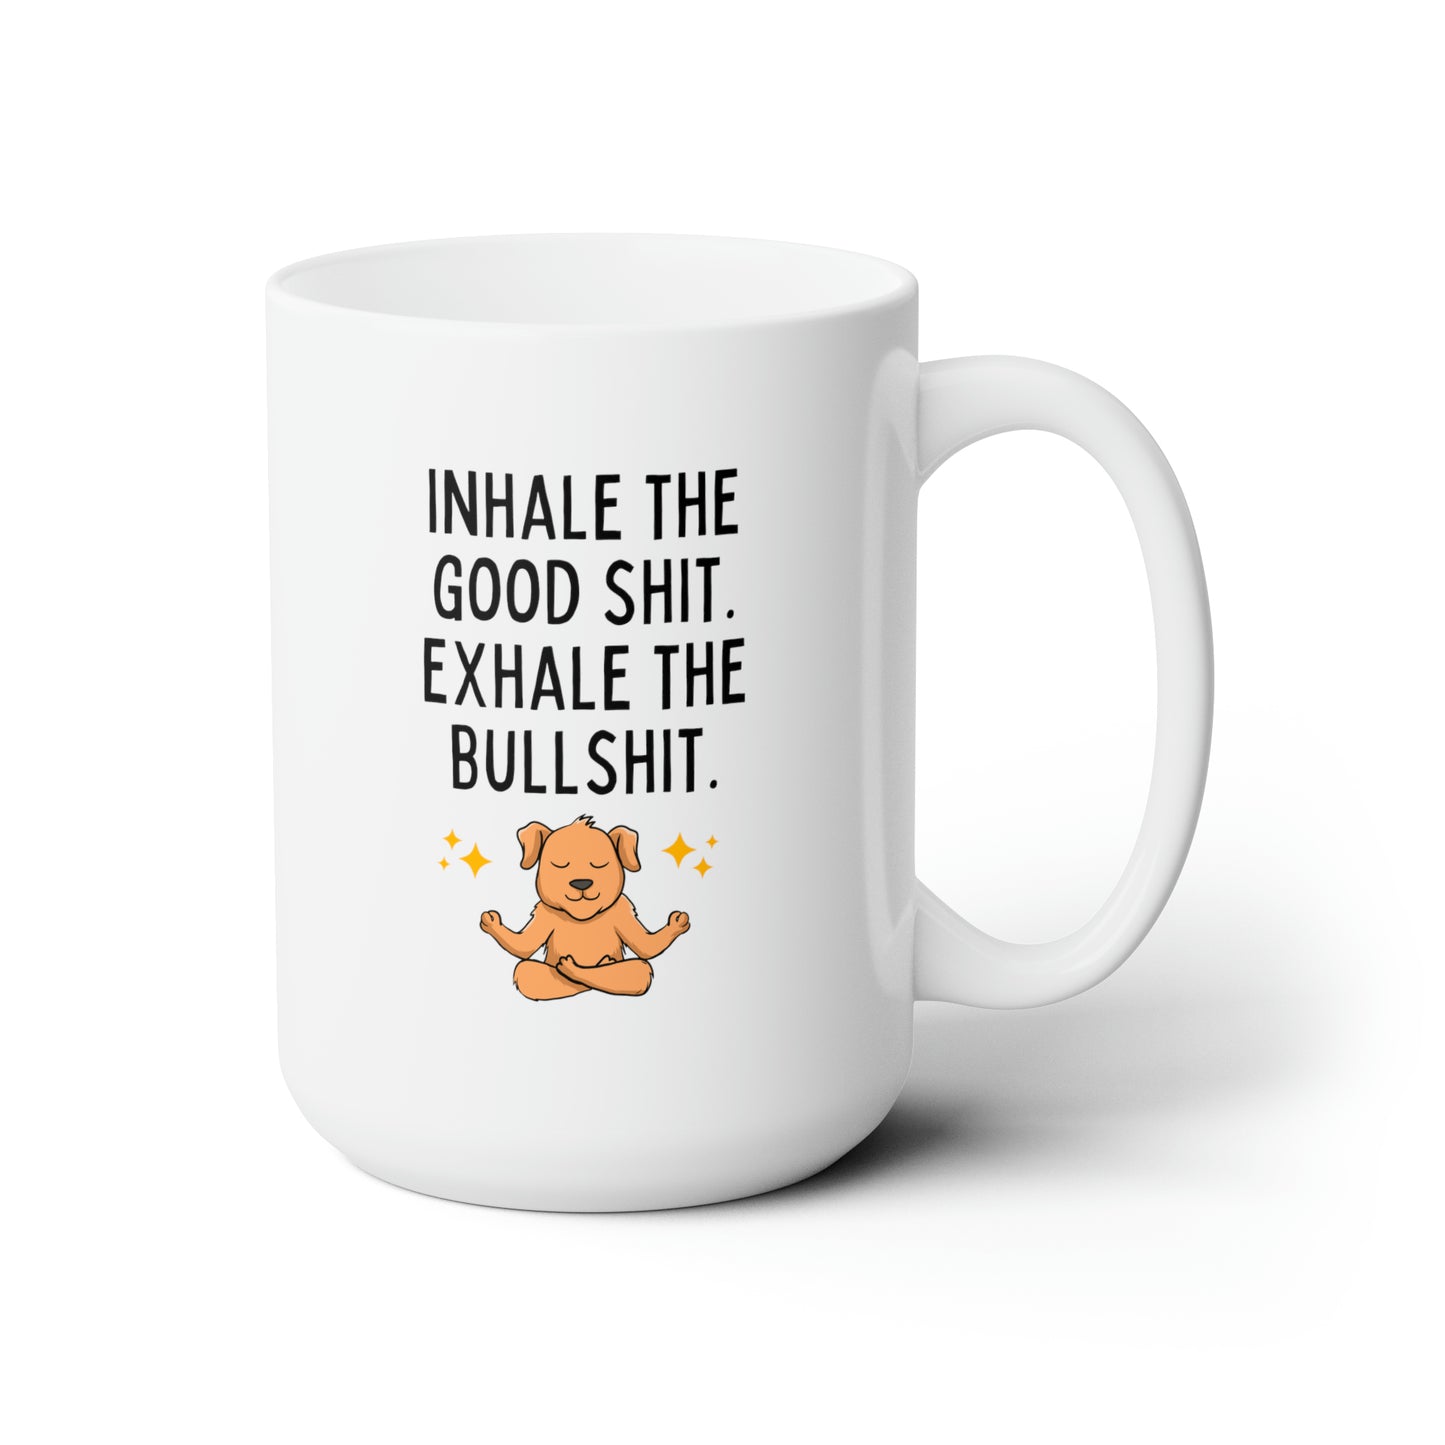 Inhale the Good Shit Exhale the Bullshit 15oz white funny large coffee mug gift for dog yoga lover fur mom BS cuss sarcastic curse cup waveywares wavey wares wavywares wavy wares